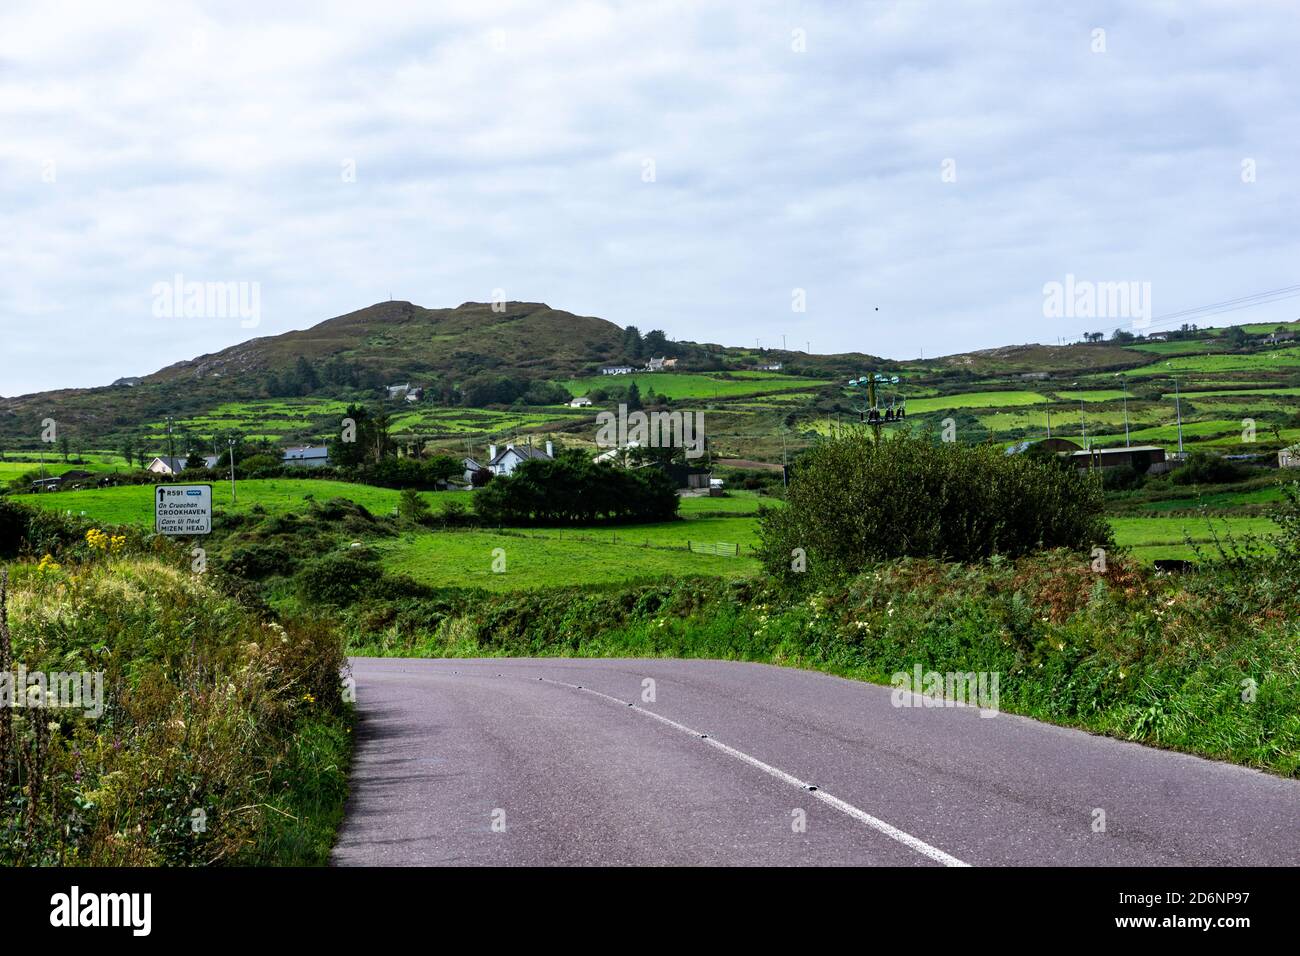 The beautiful landscape of West Cork, County Cork, Ireland. The road sign is for Crookhaven and Mizen Head. Stock Photo